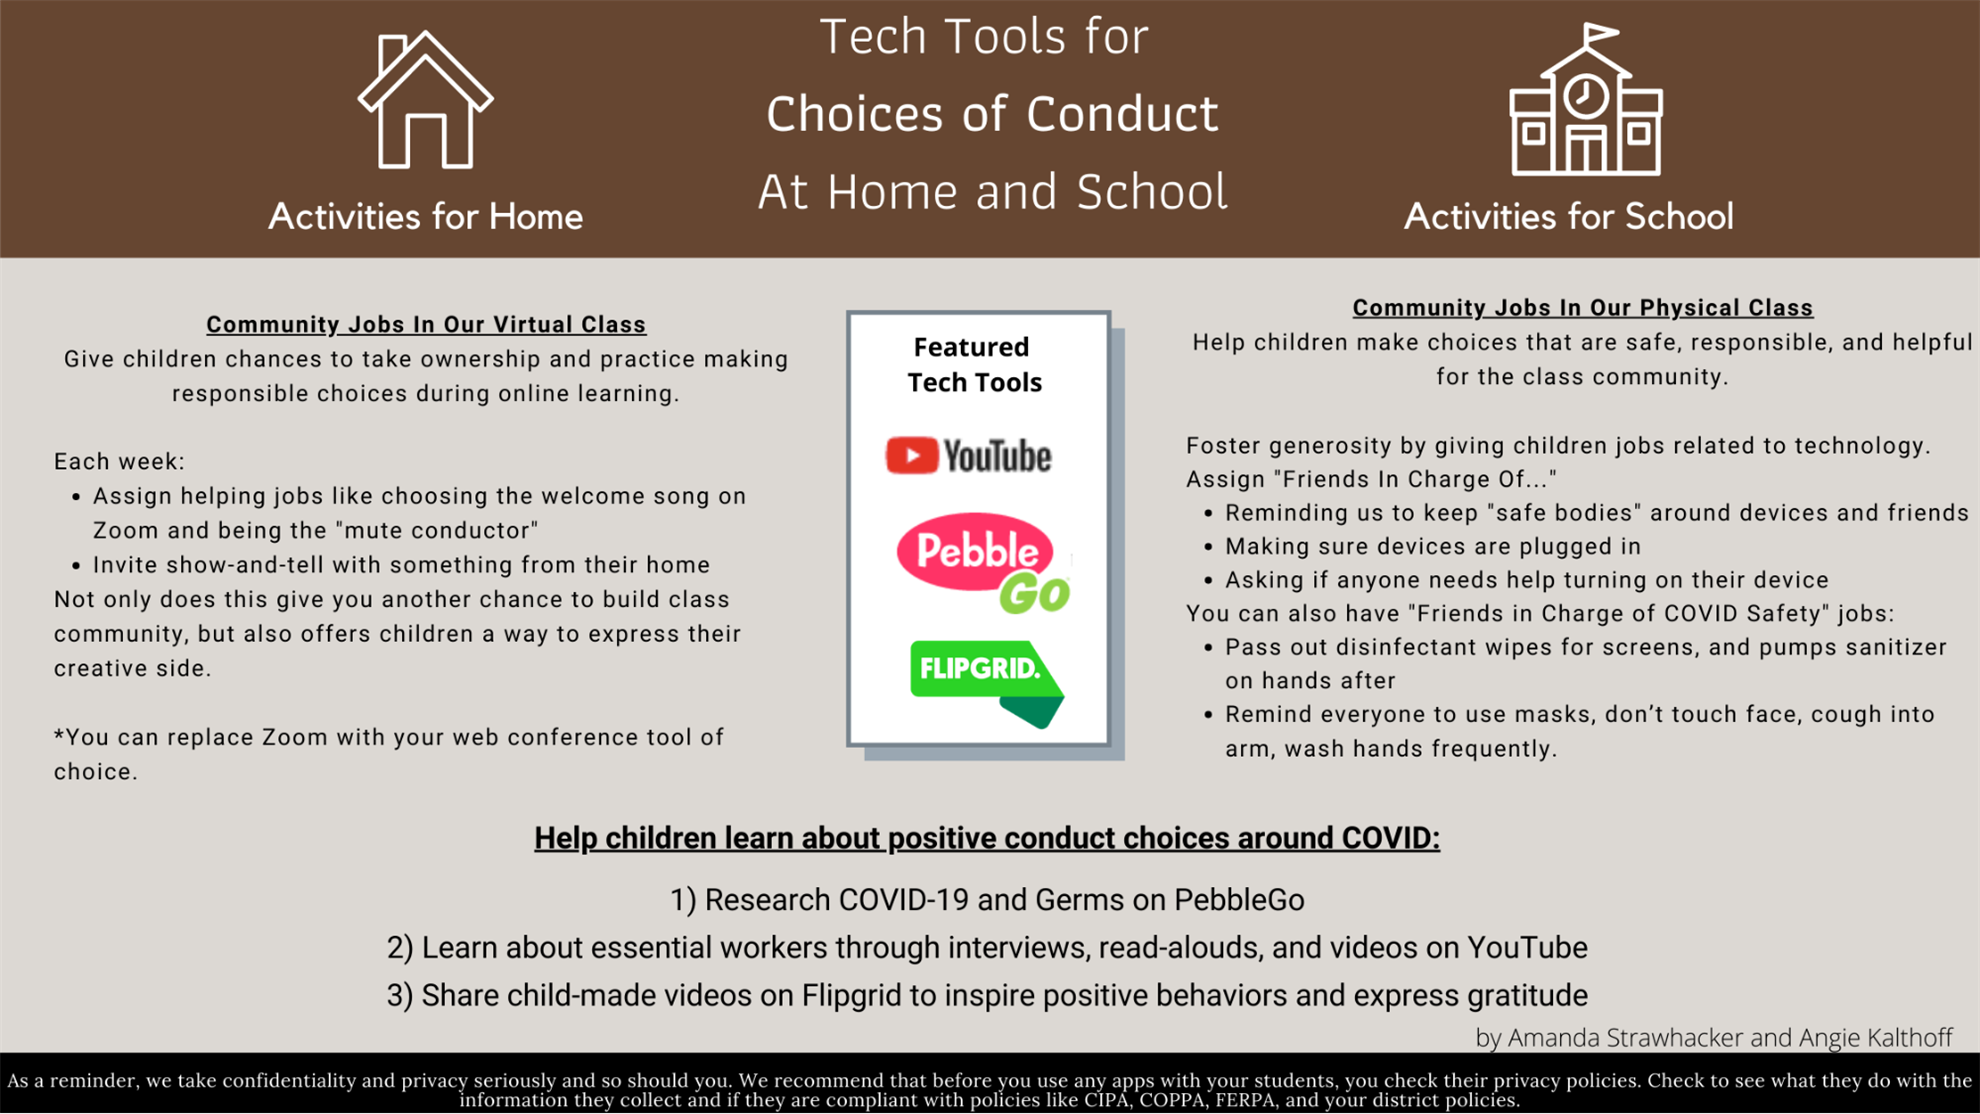 Webpage screenshot for Tech Tools for choices of conduct at home and school.